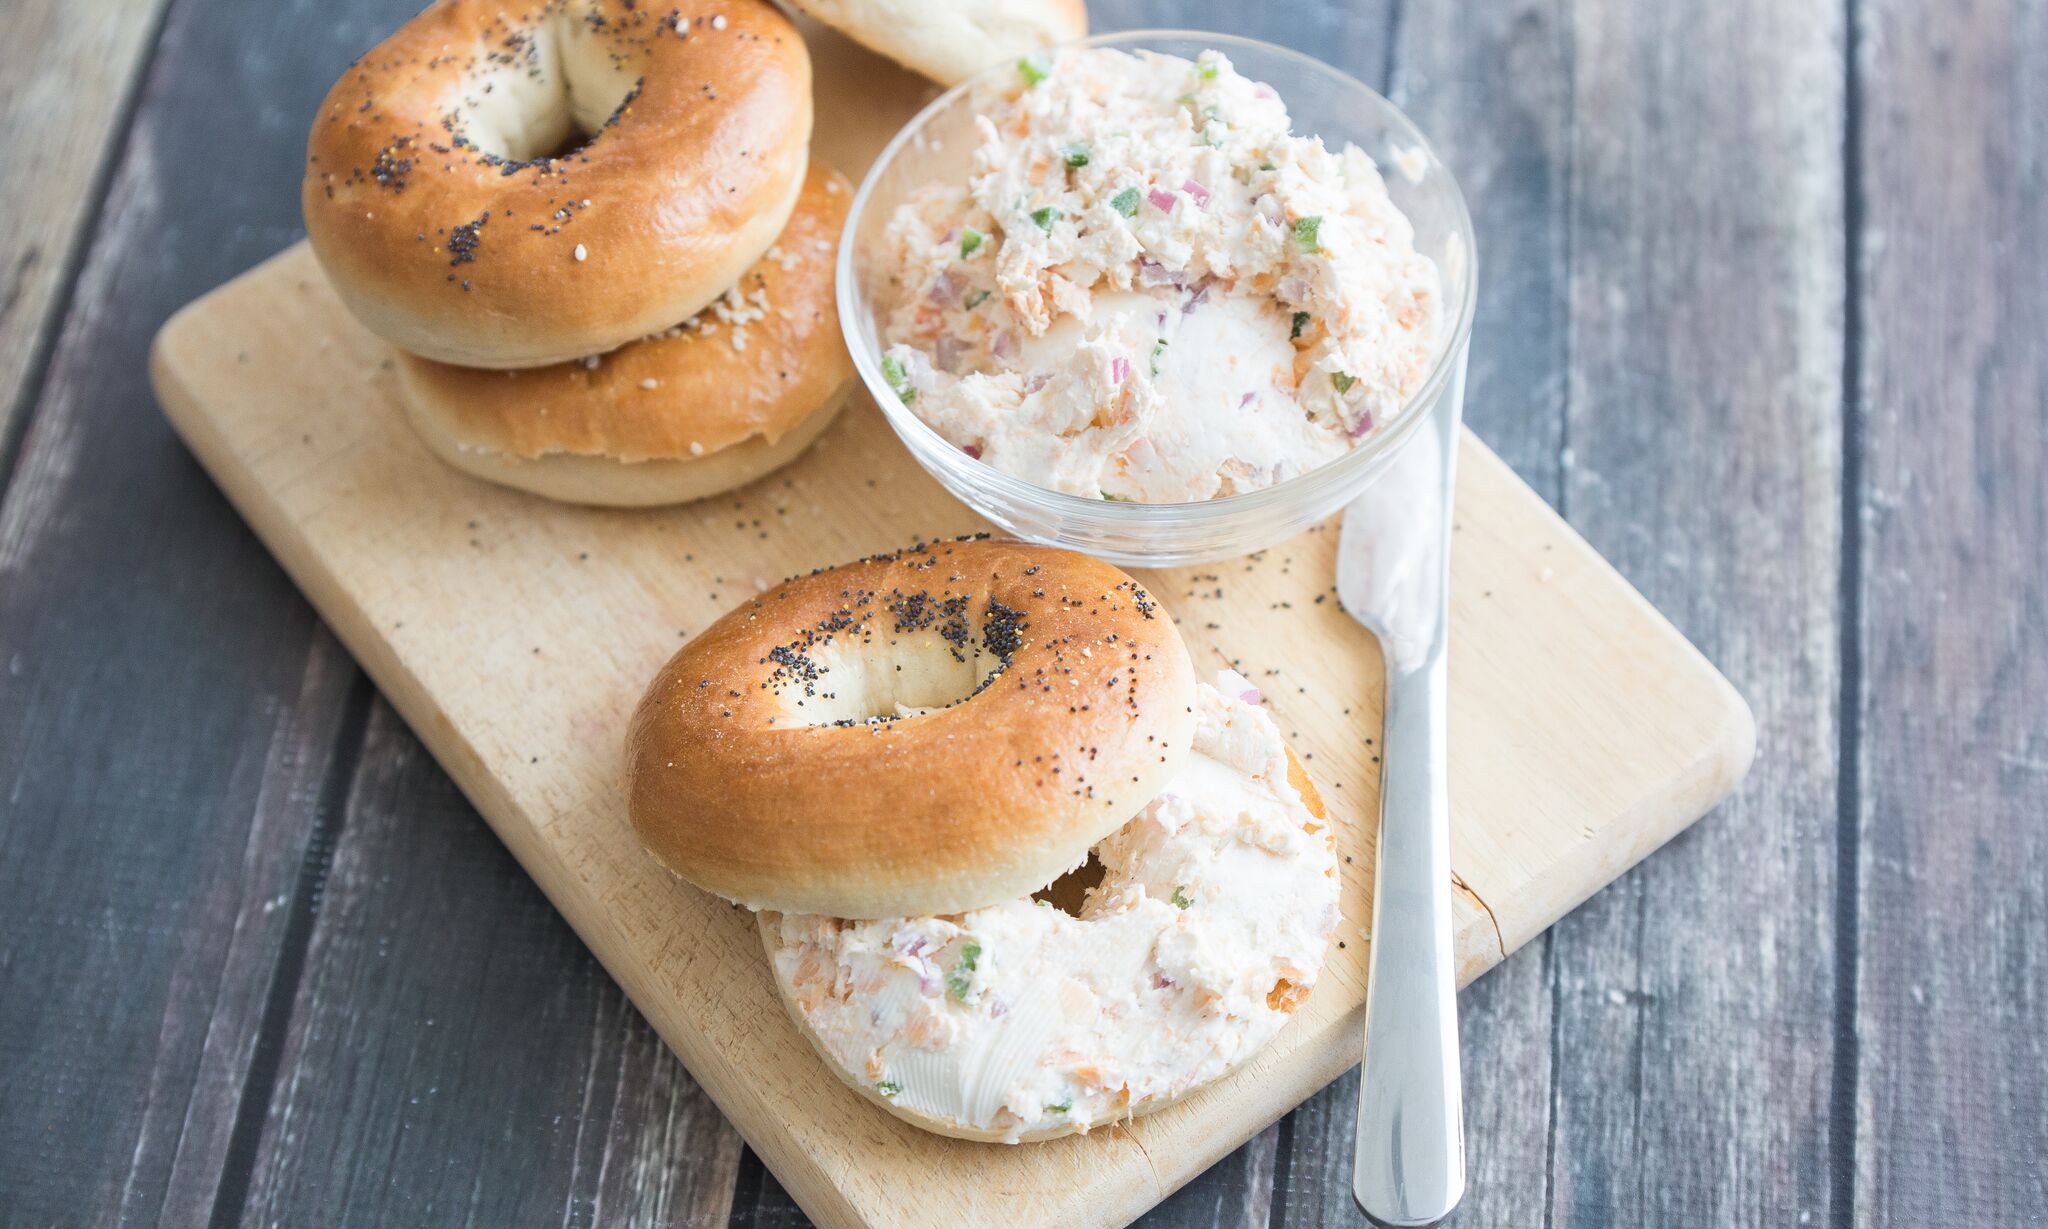 Allow mixture to serve or serve with bagels right away. 